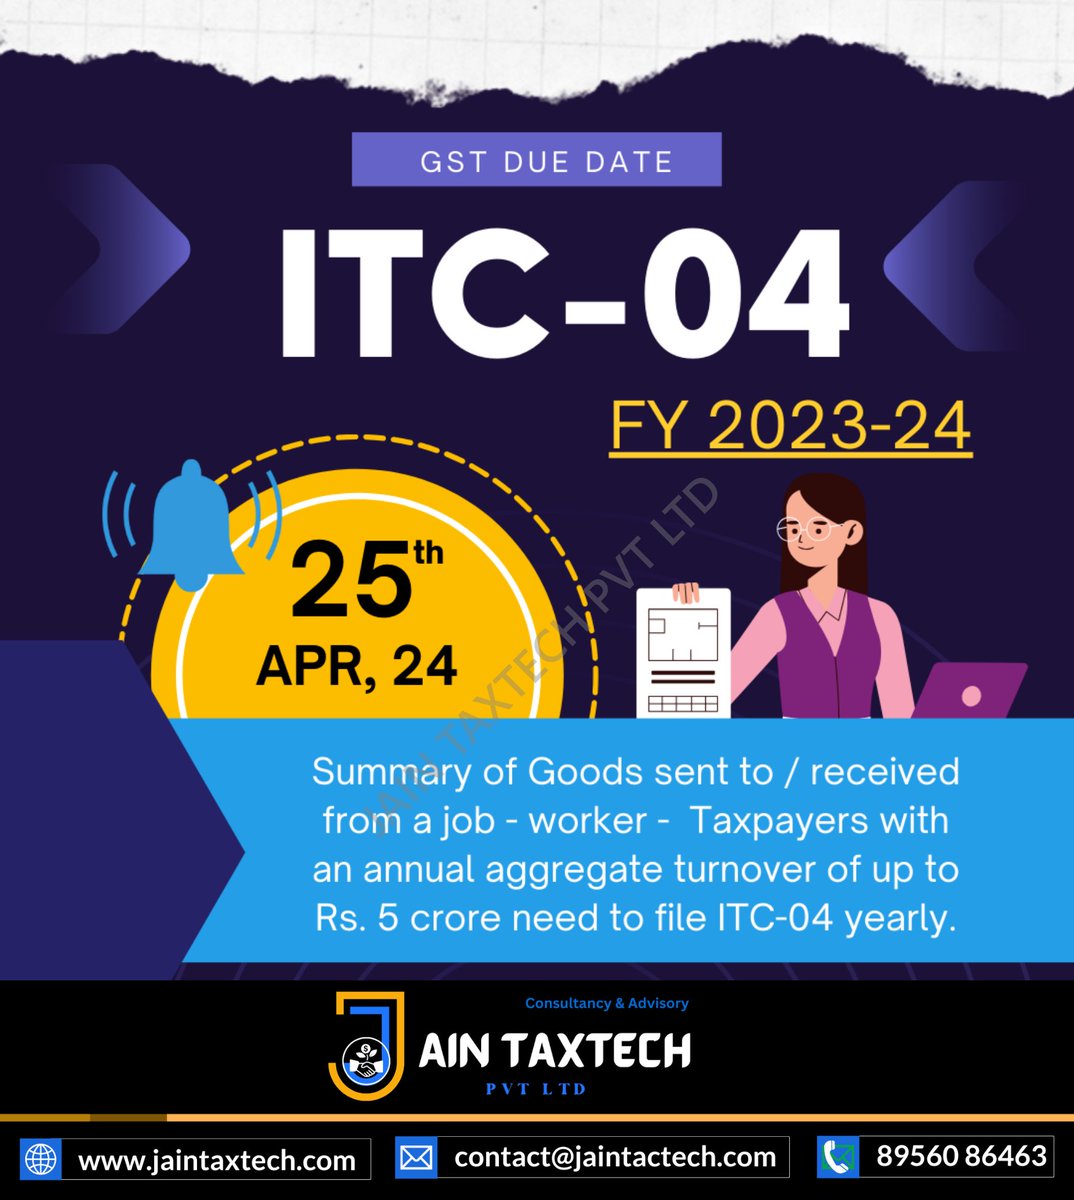 📦 Attention taxpayers! 📊 File your ITC-04 for the summary of goods sent to or received from a job-worker. Taxpayers with an annual turnover of up to Rs. 5 crore need to file ITC-04 yearly.💼📝 #ITC04 #JobWorker #TaxCompliance #JainTaxTech #AccountingServices #CAConsultancy